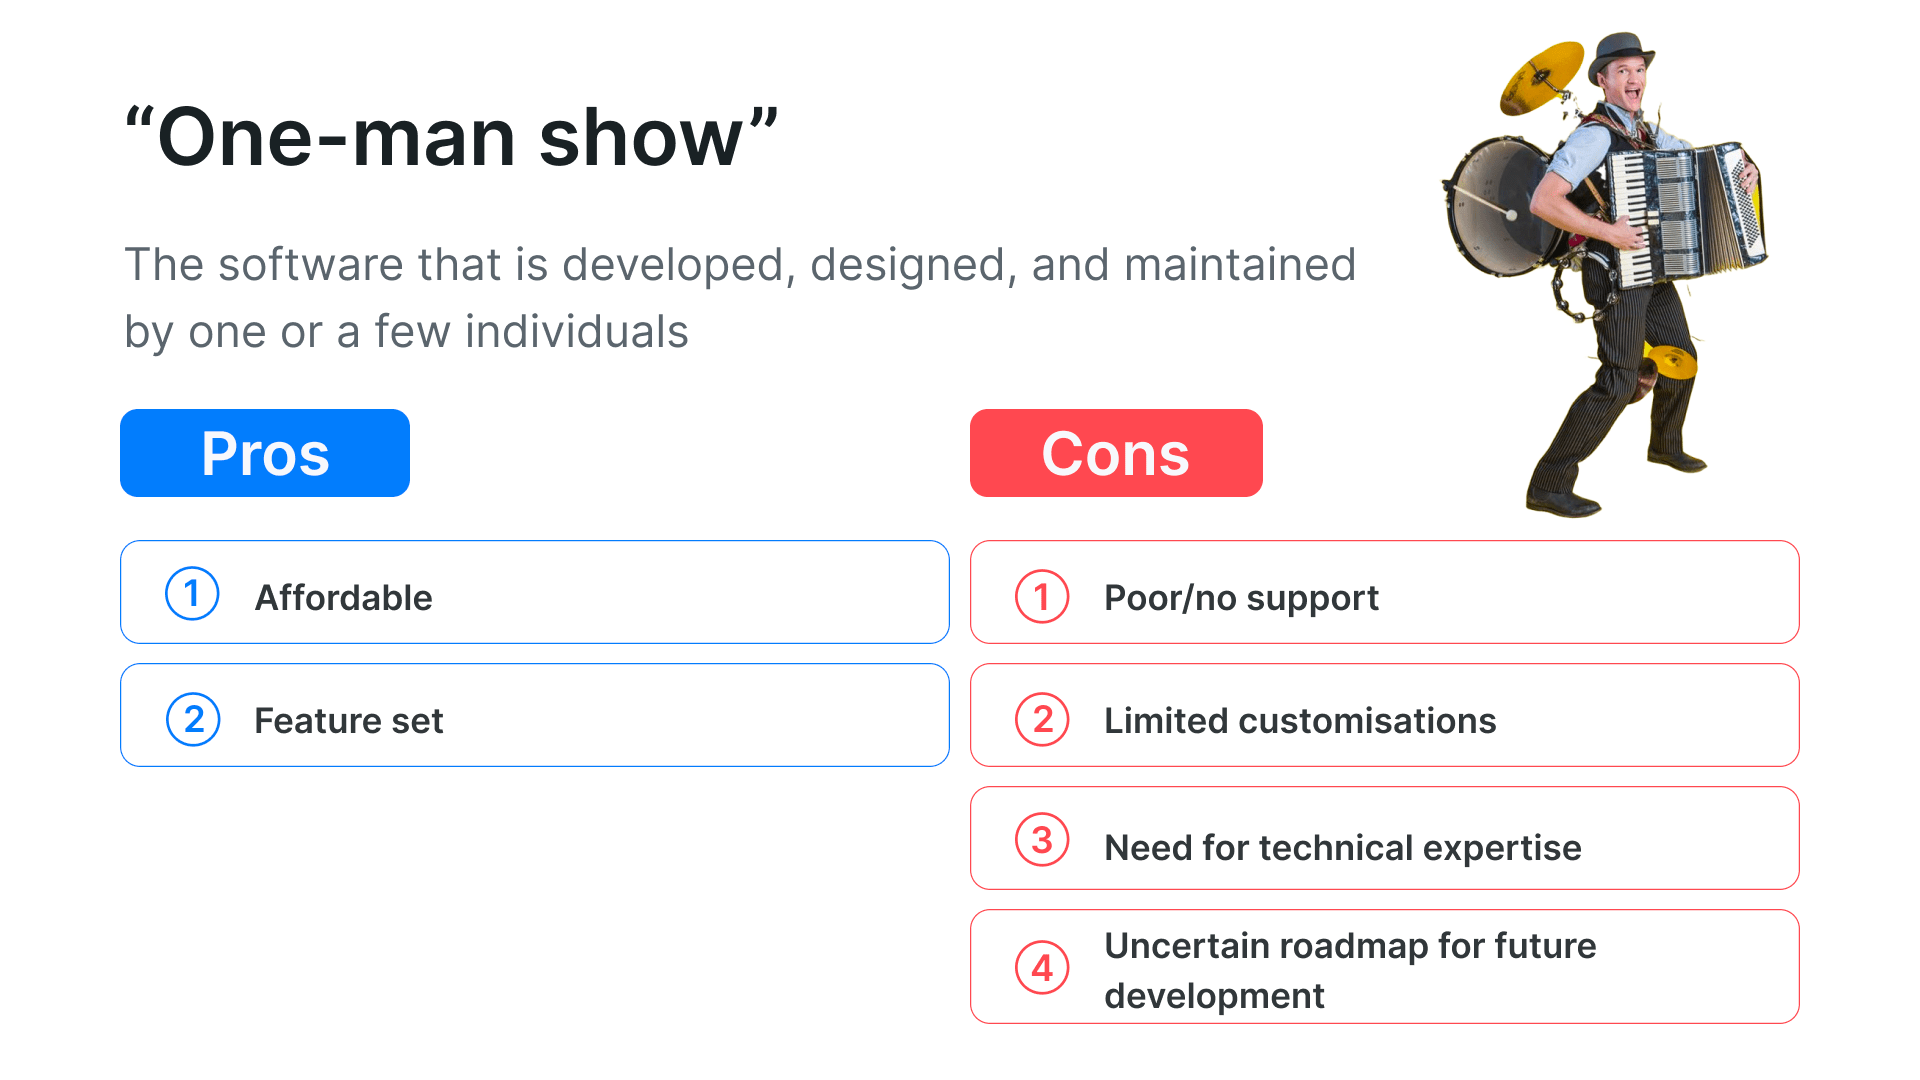 one-man show software